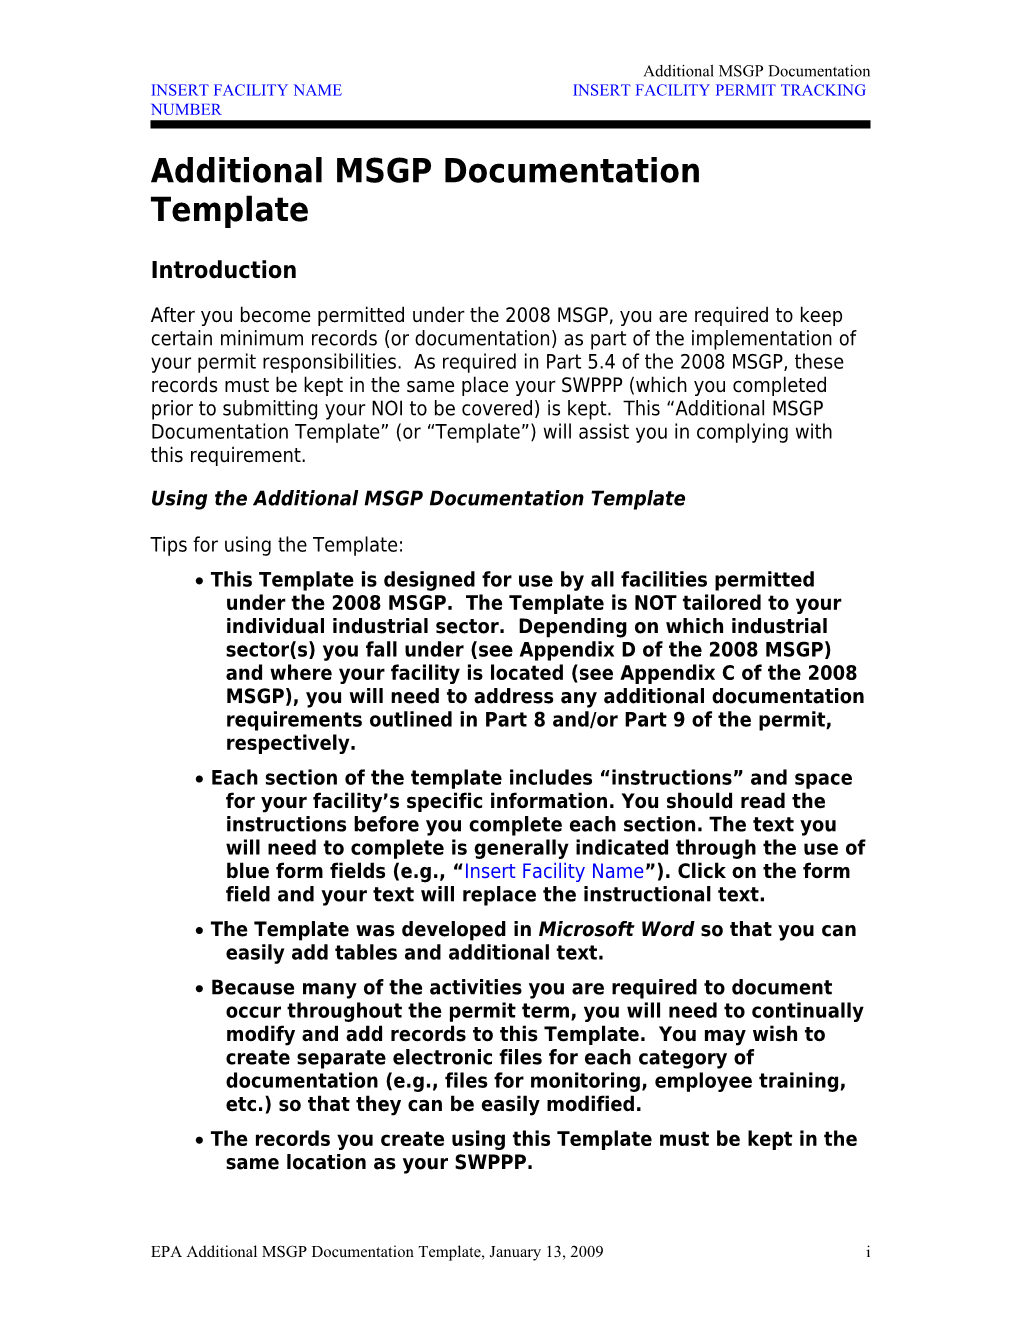 Additional SWPPP Documentation Template